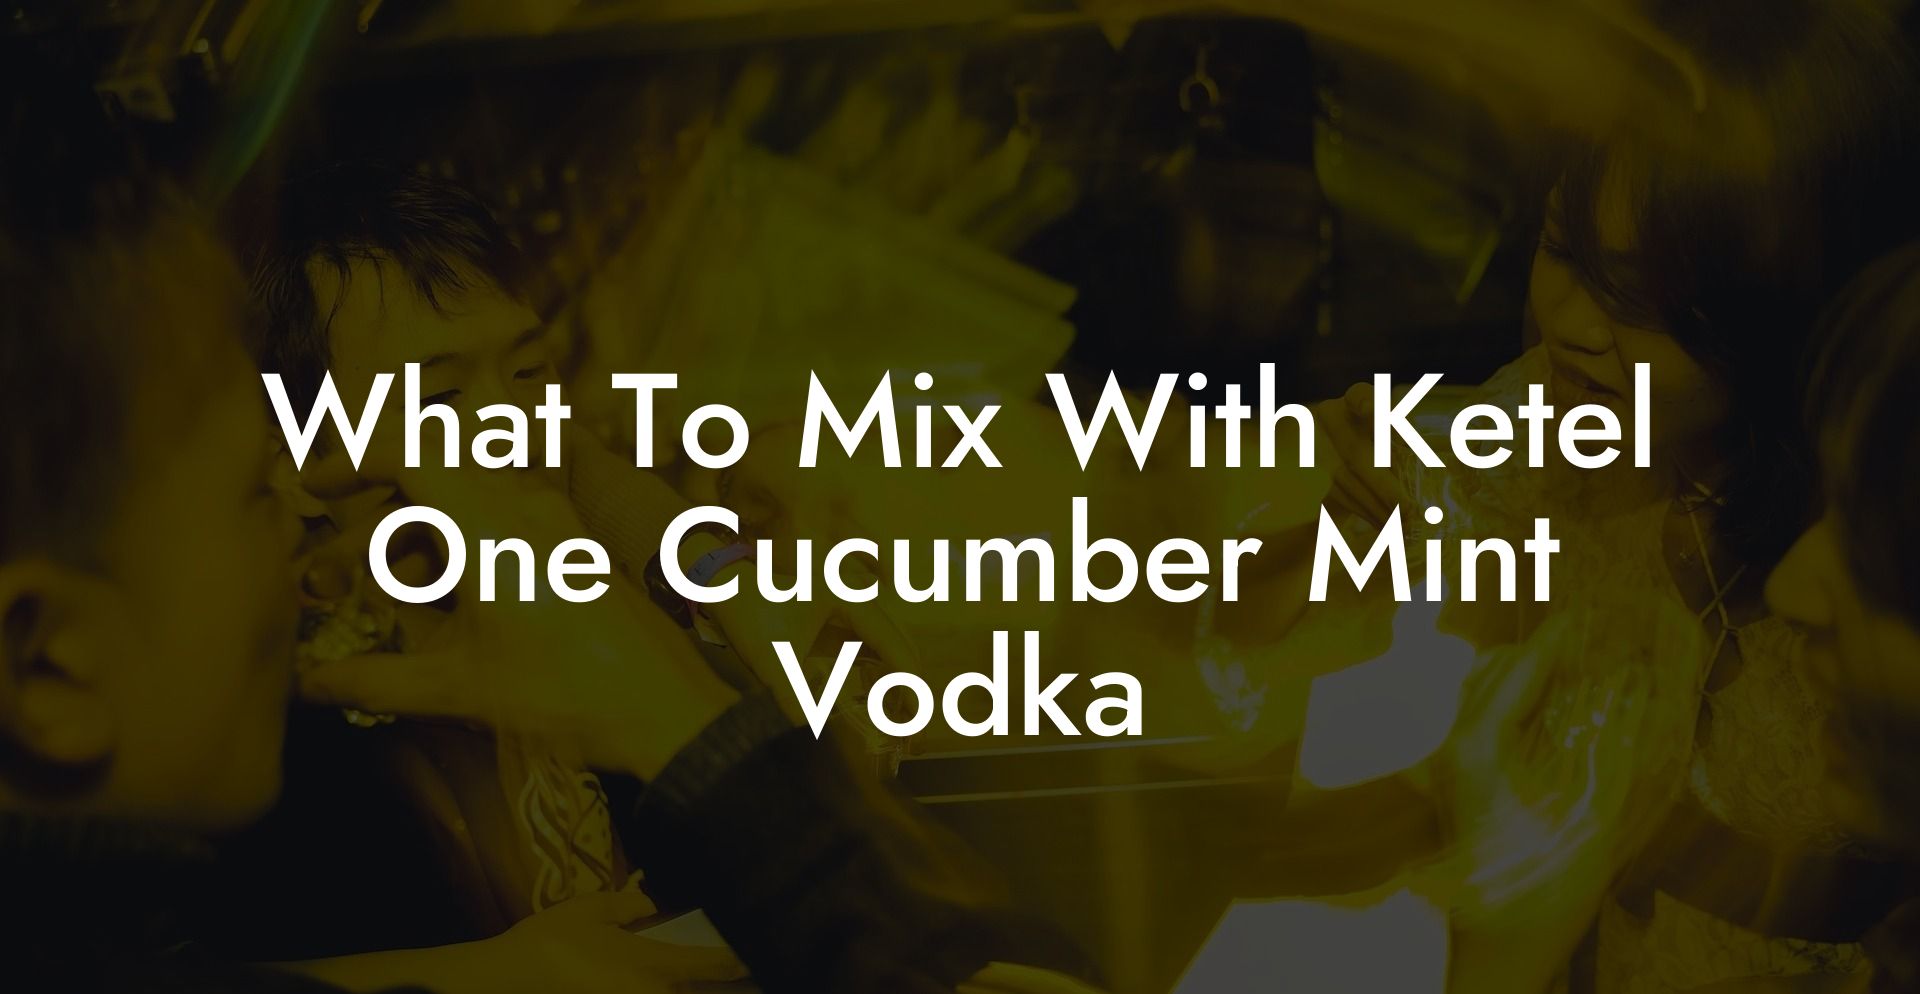 What To Mix With Ketel One Cucumber Mint Vodka